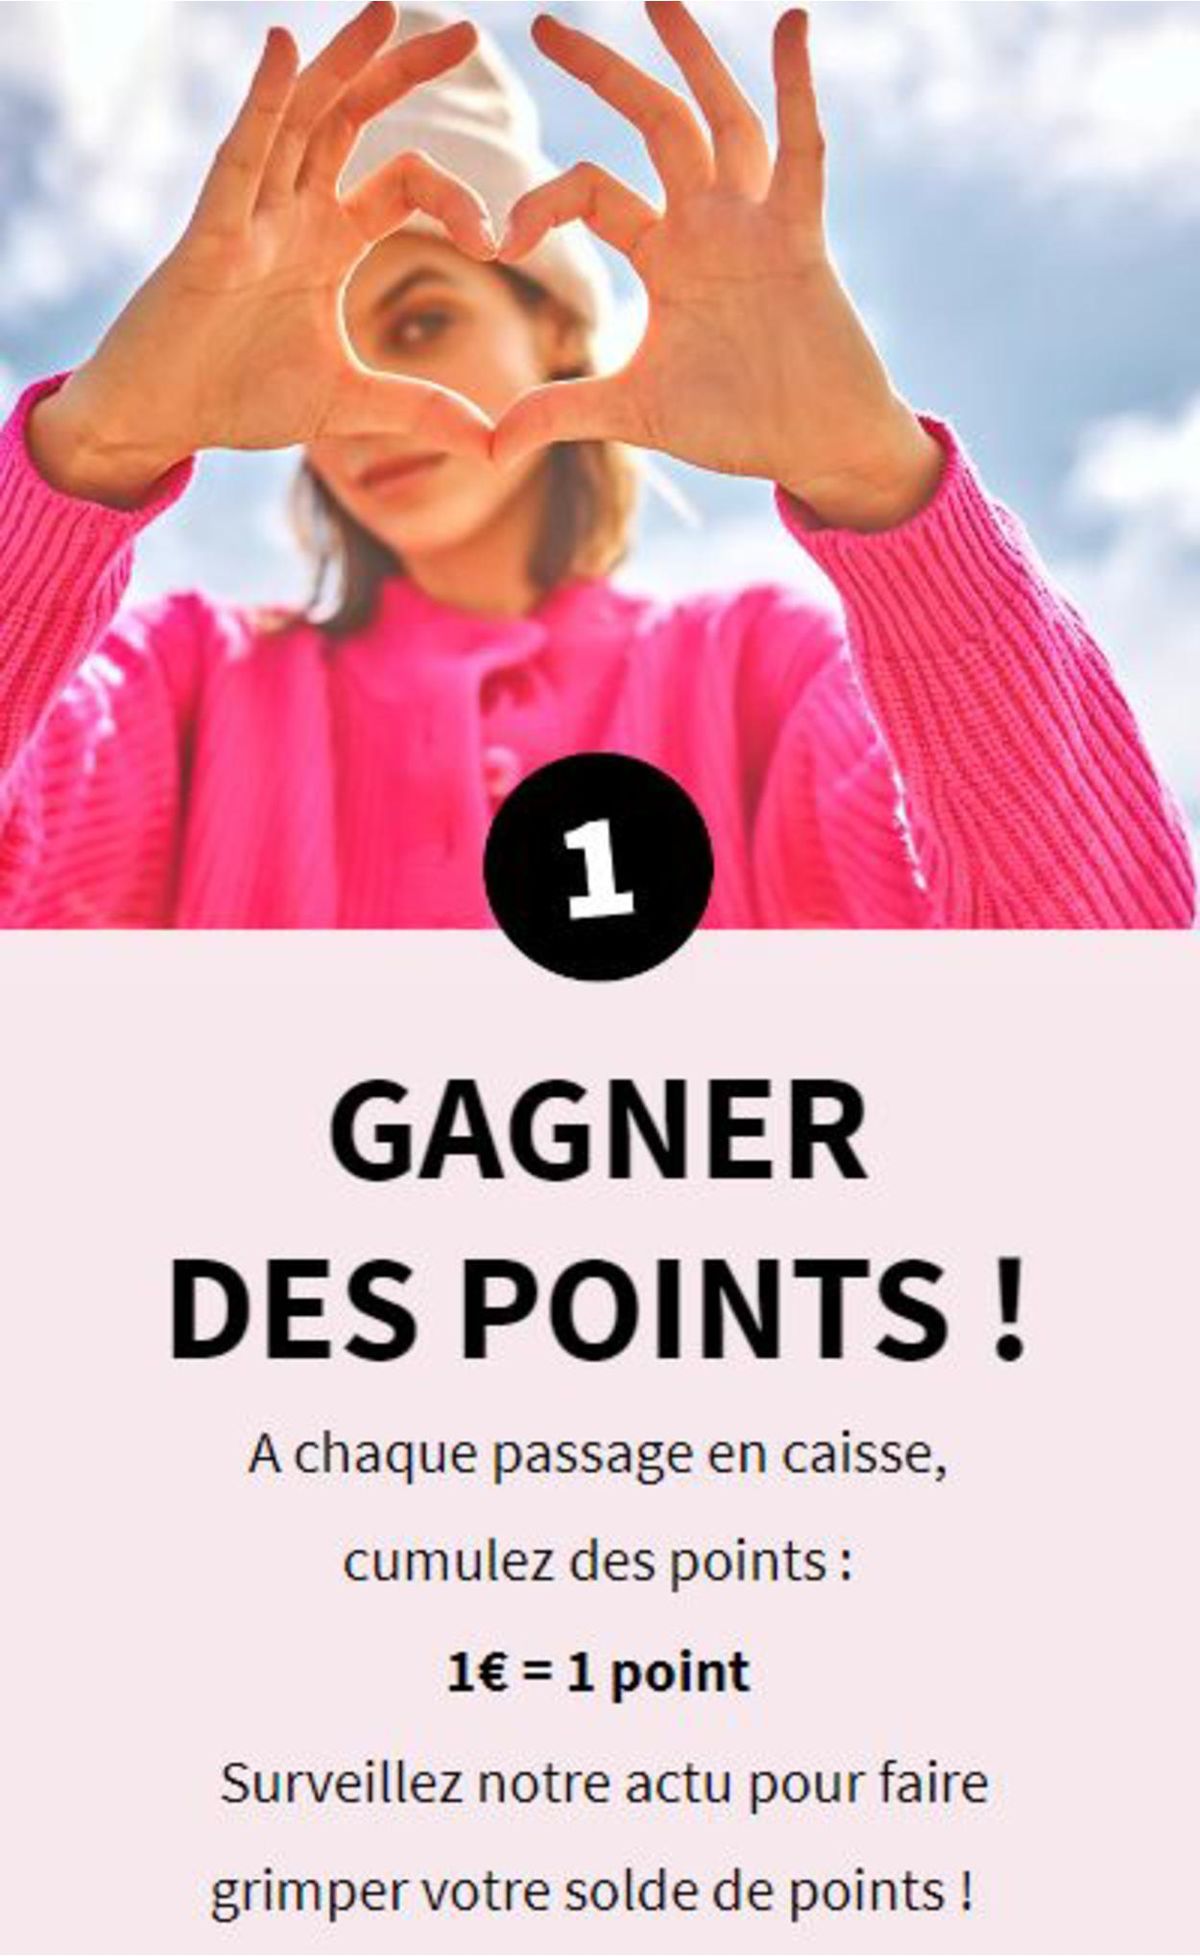 Catalogue GAGNER DES POINTS !, page 00001